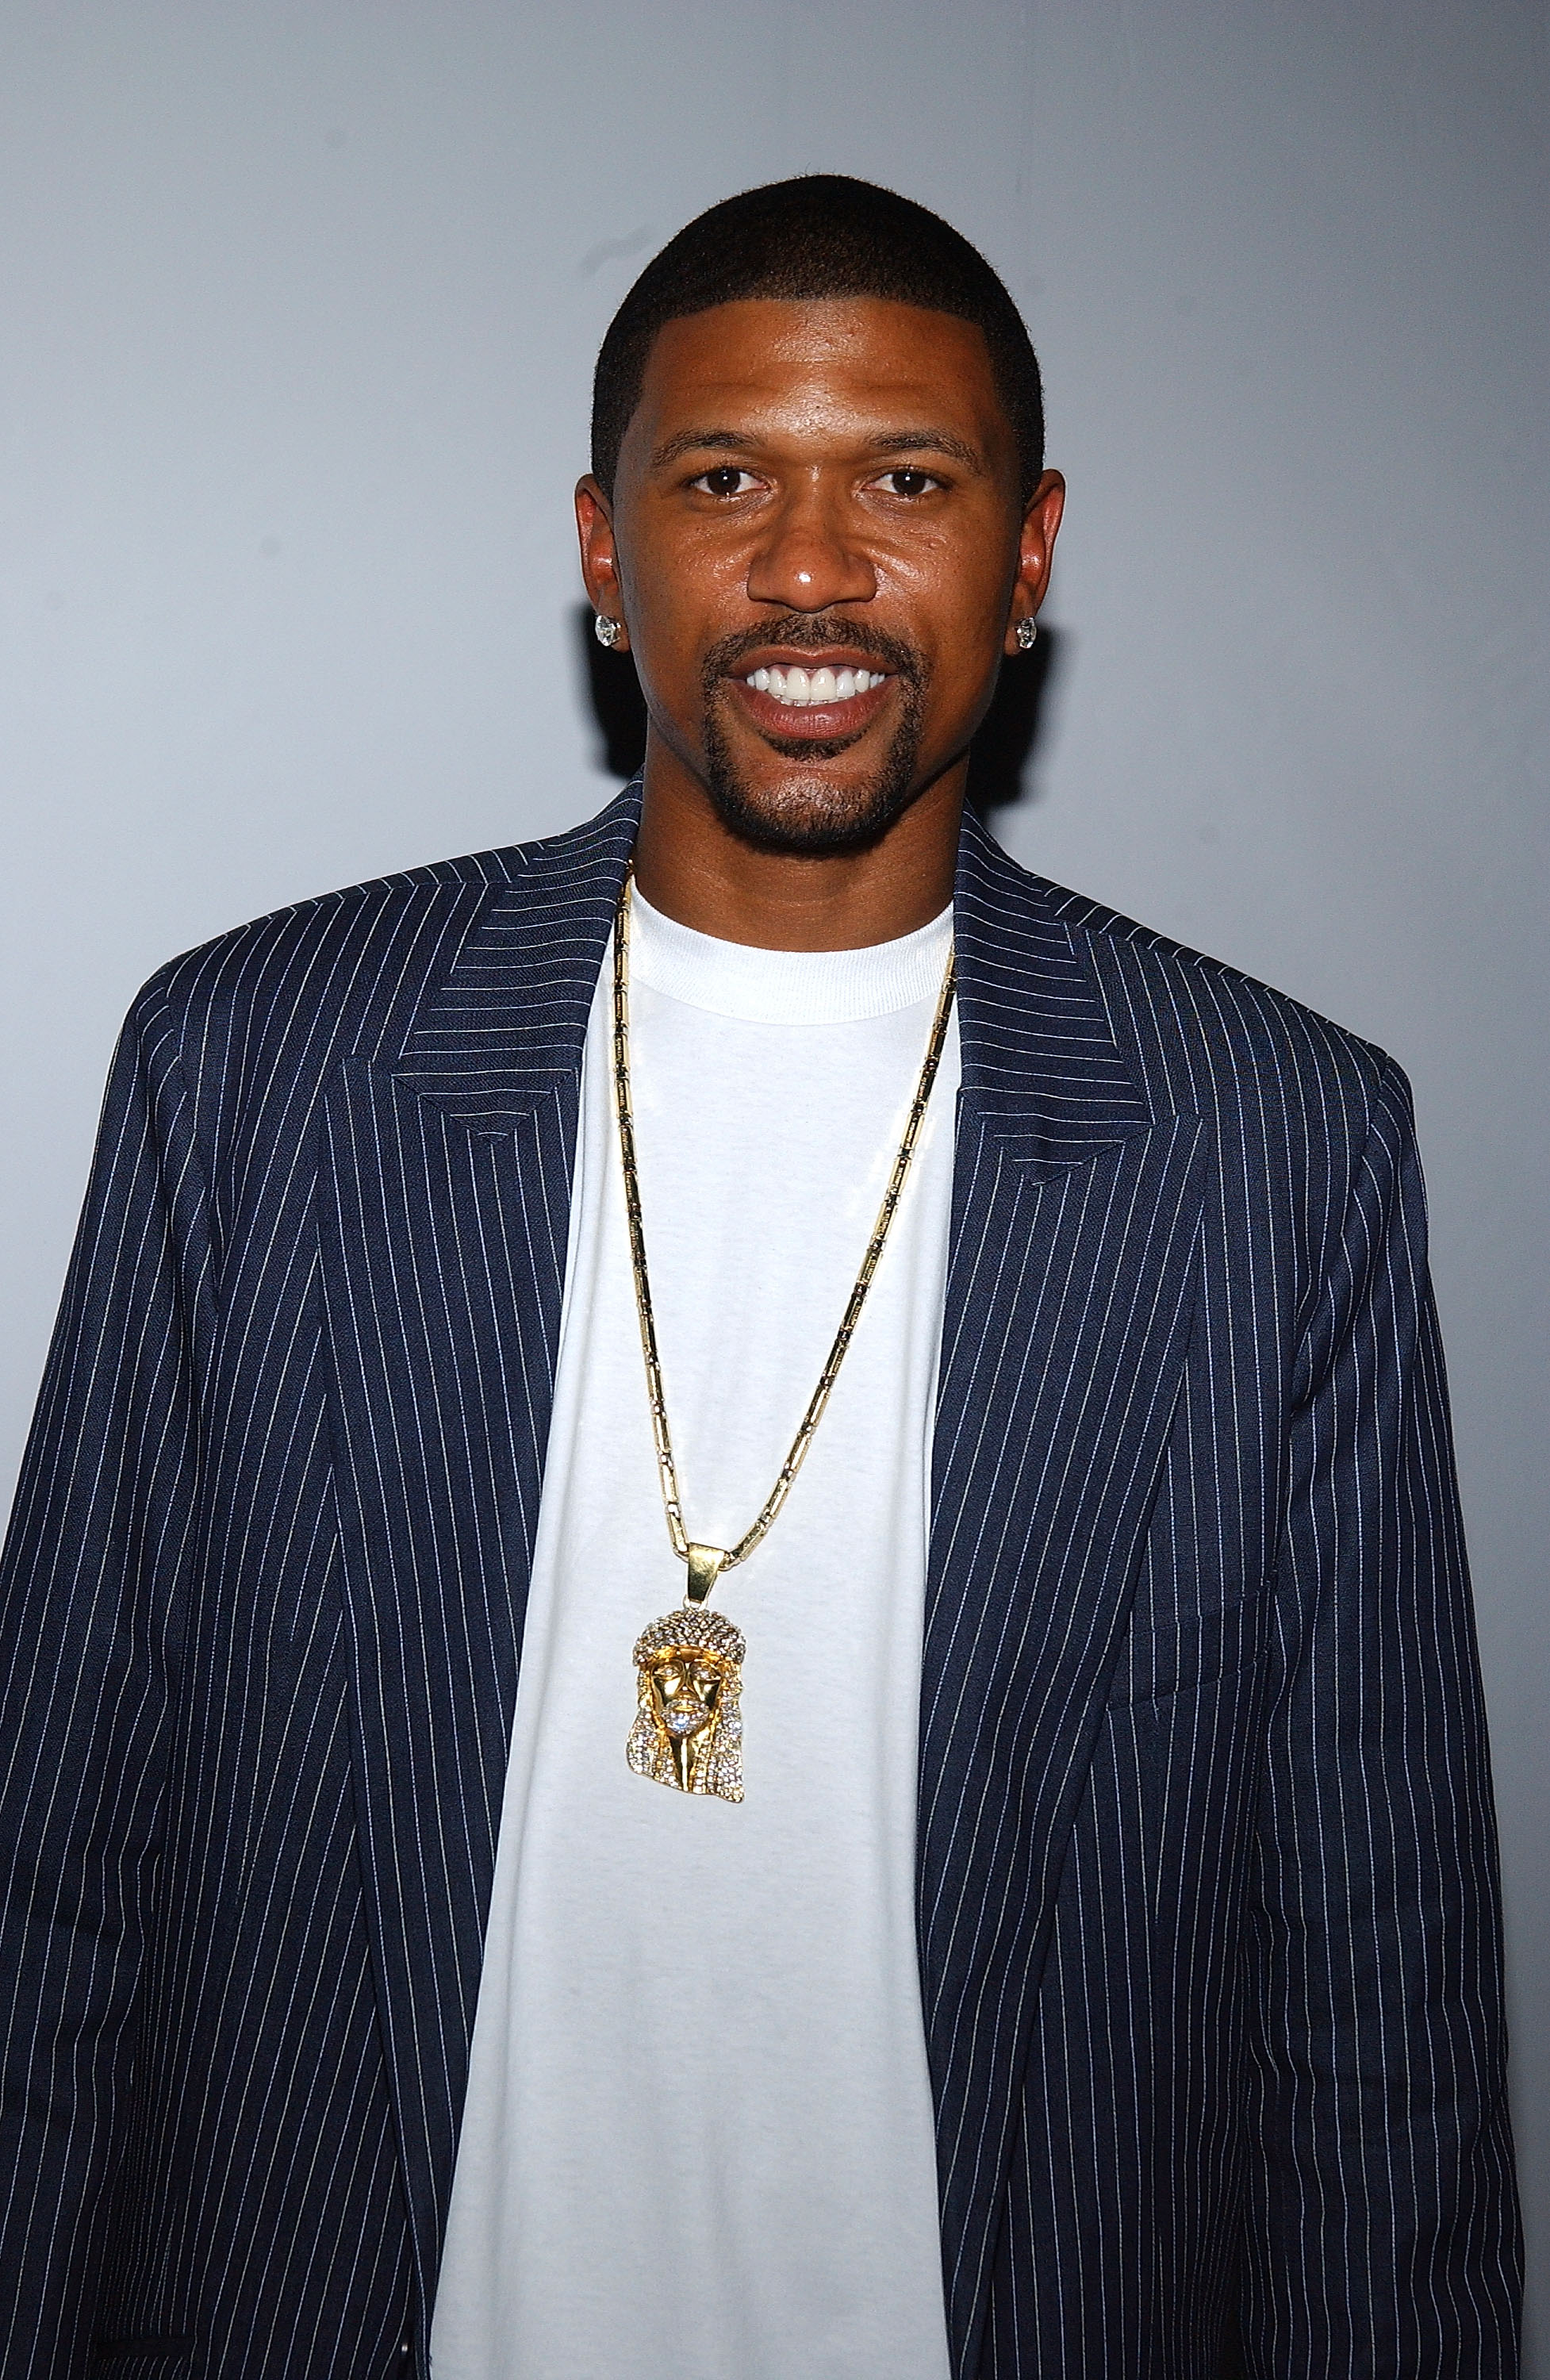 NEW YORK - SEPTEMBER 13:  Basketball star Jalen Rose attends the Y-3 Spring 2006 fashion show during Olympus Fashion Week on September 13, 2005 in New York City.  (Photo by Bryan Bedder/Getty Images)